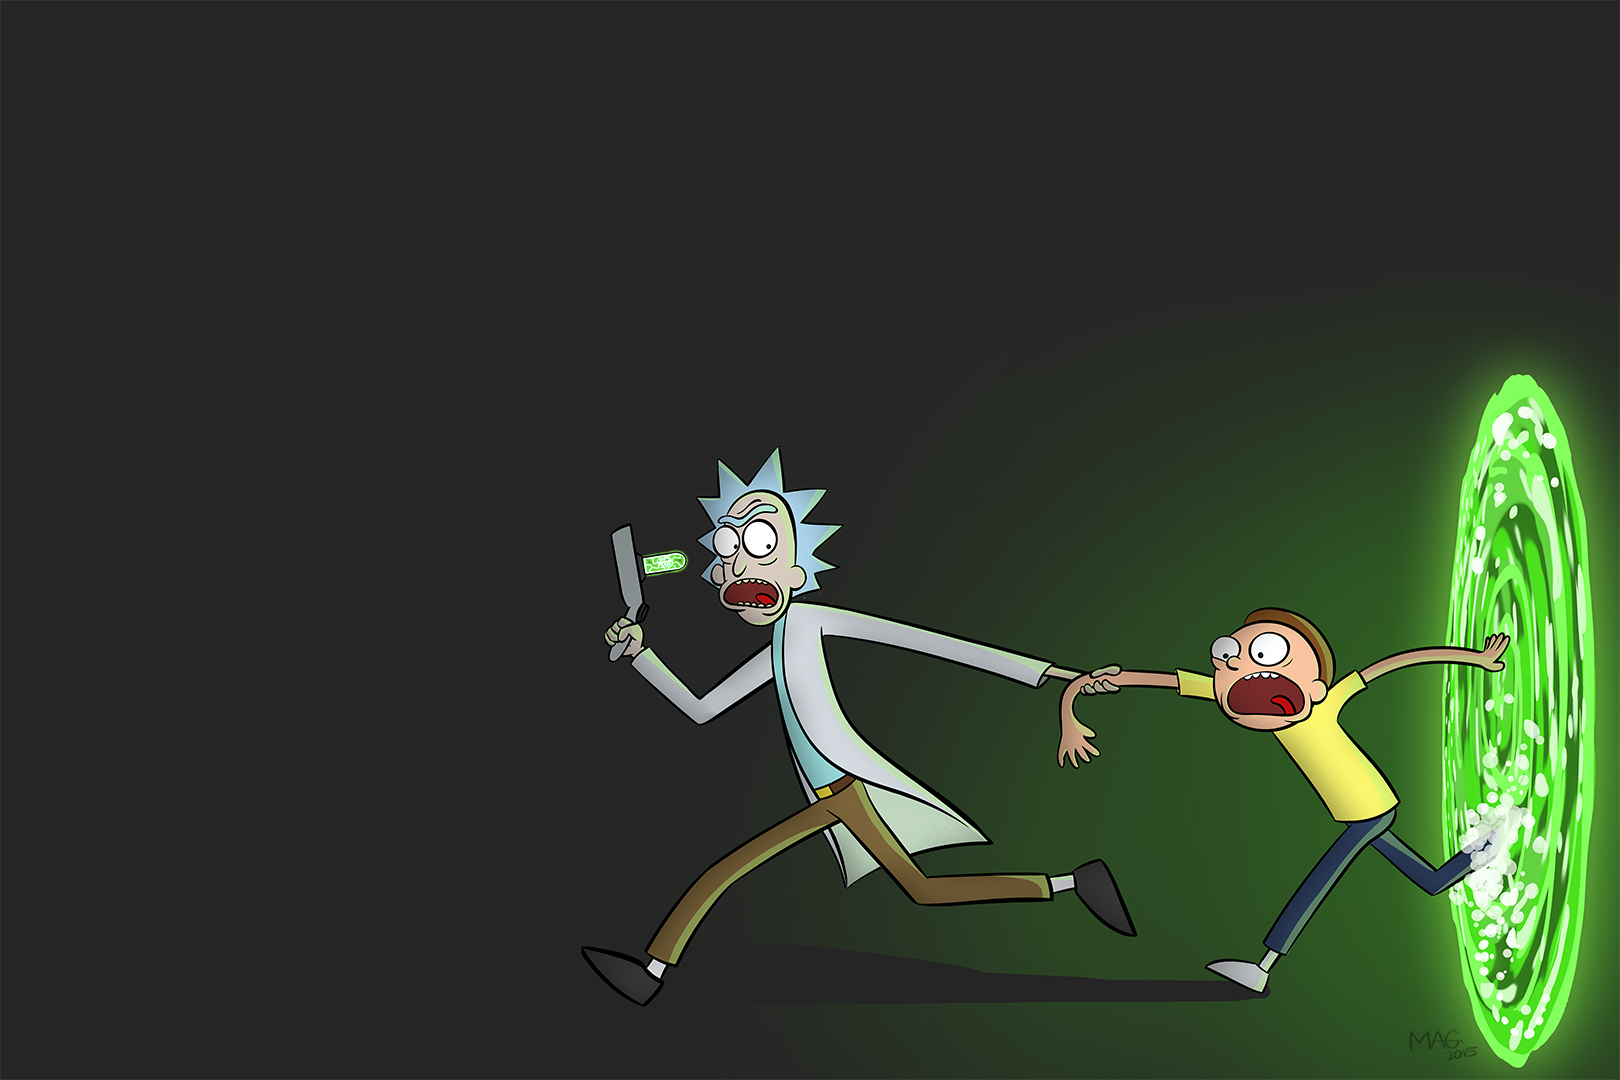 500 Cool Rick And Morty Pc Wallpapers  Background Beautiful Best  Available For Download Cool Rick And Morty Pc Images Free On  Zicxacomphotos  Zicxa Photos